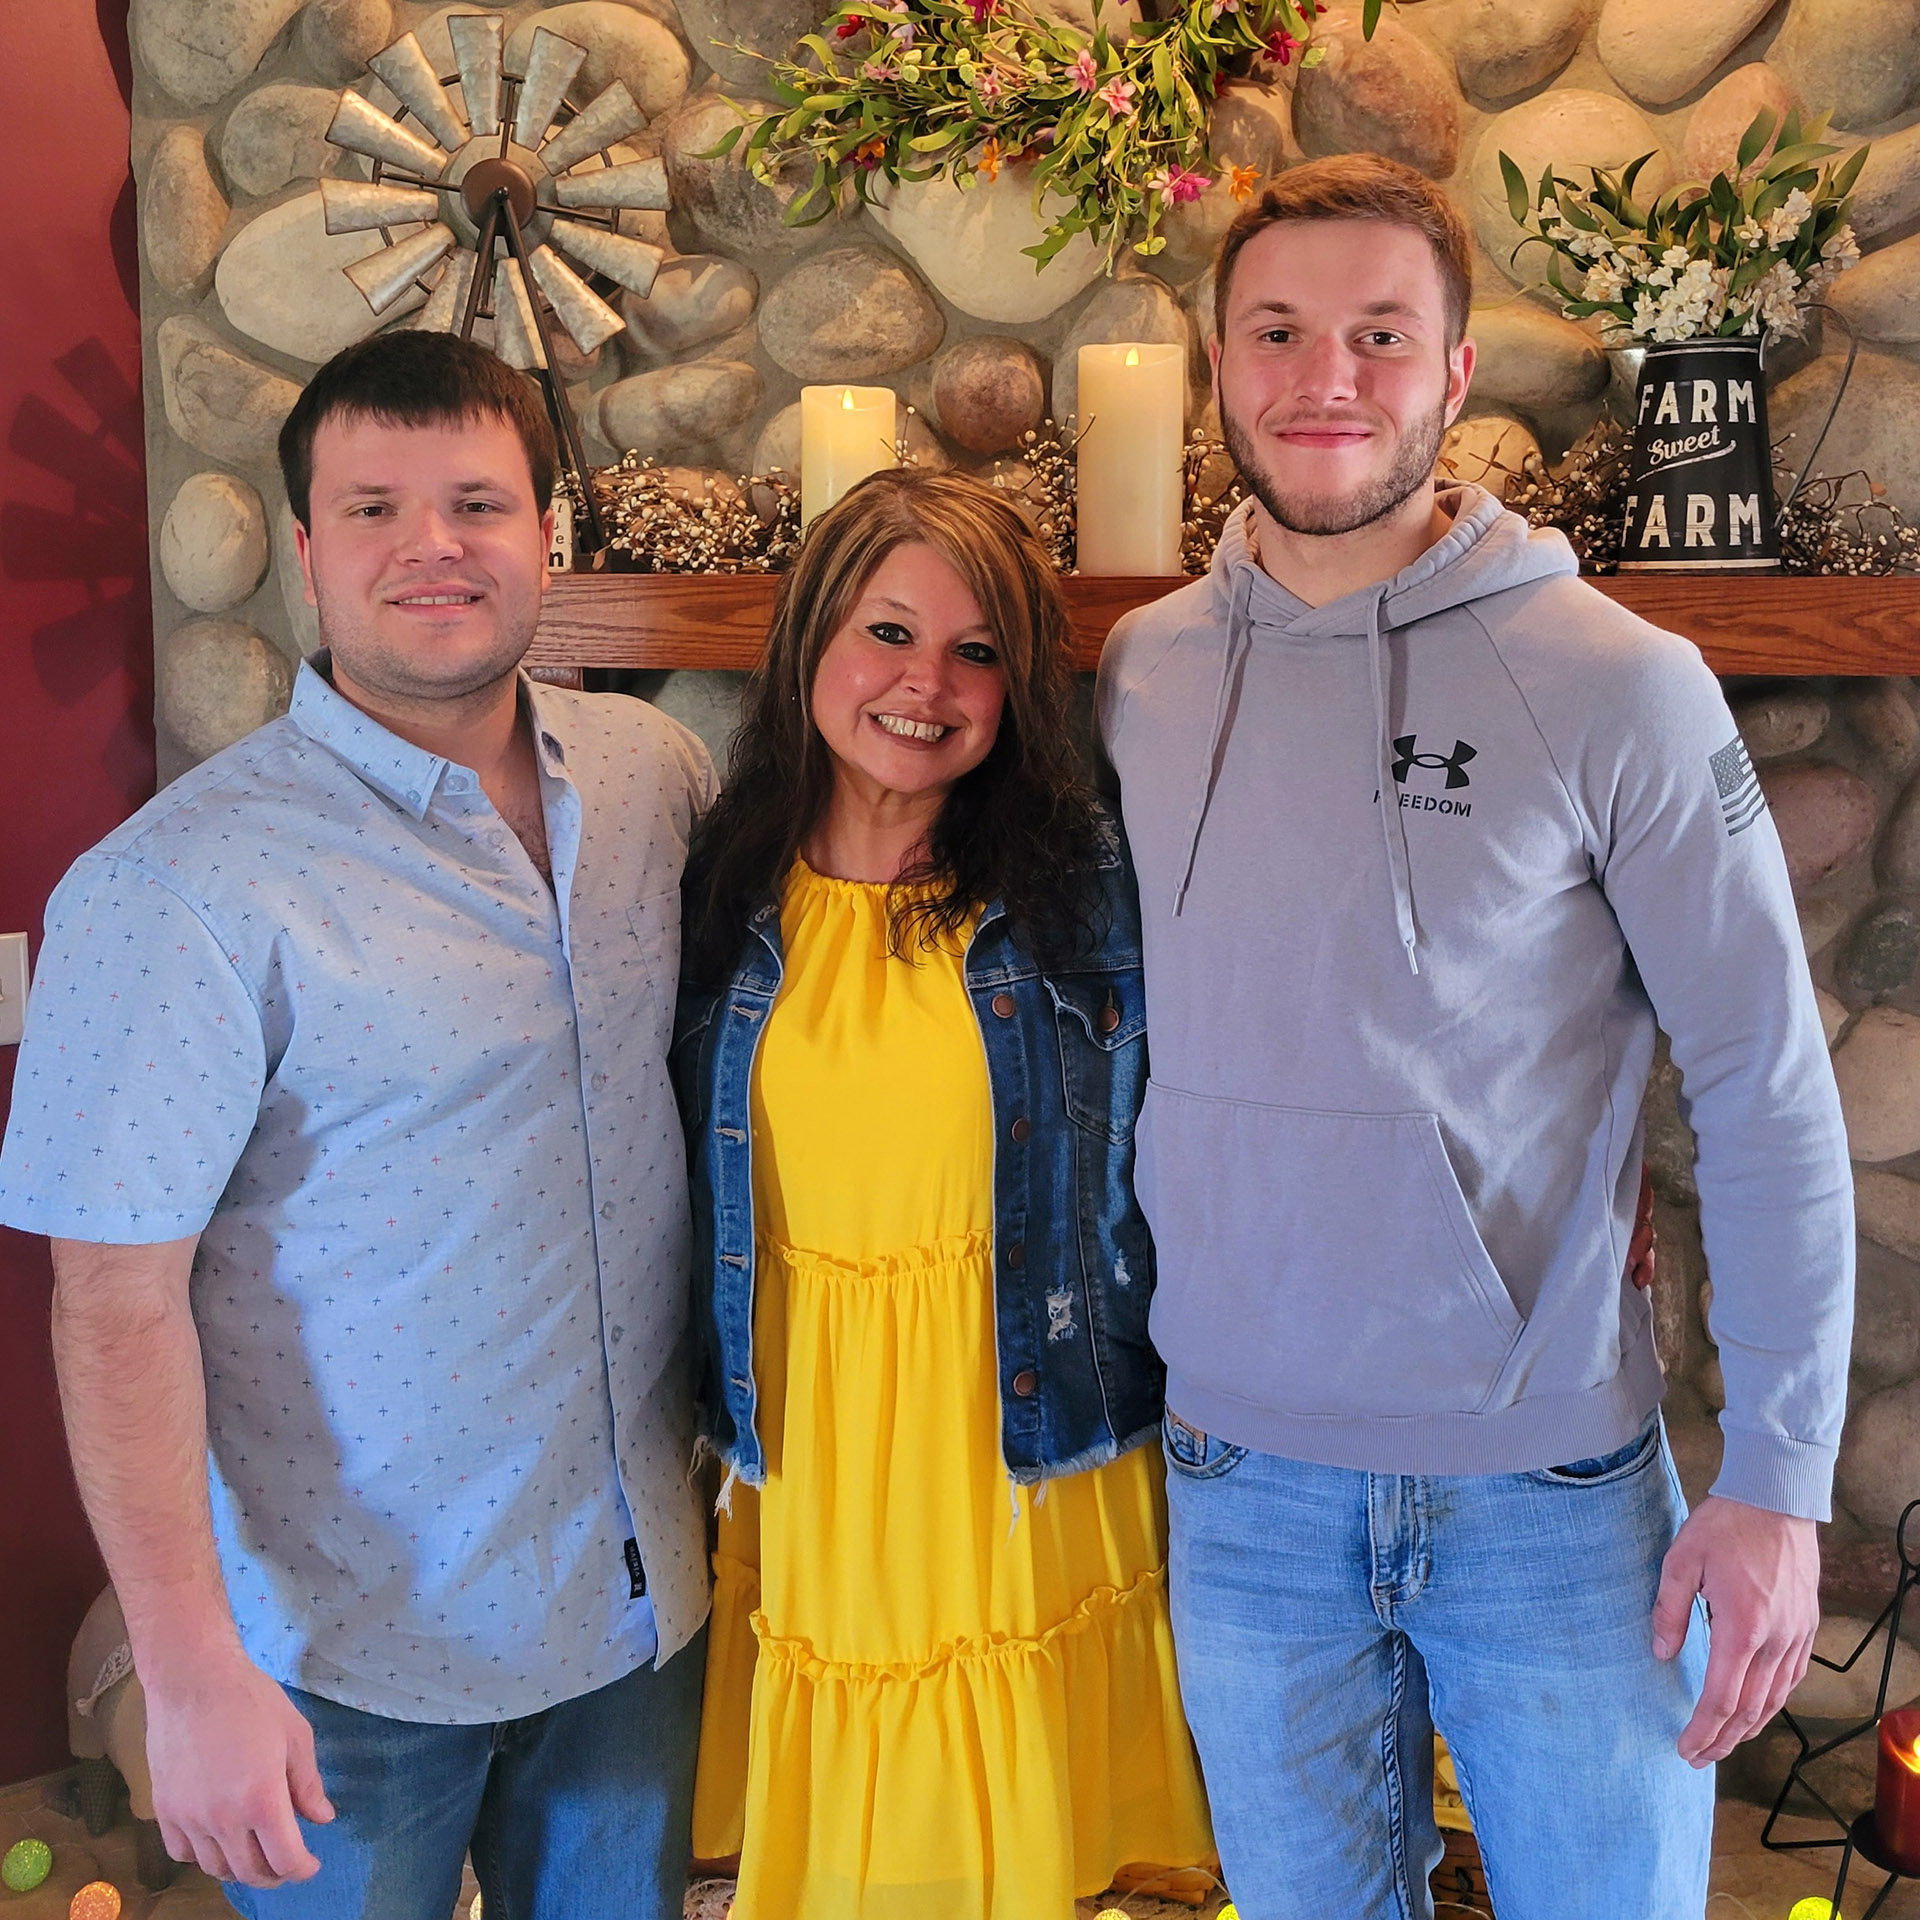 Connor and Carter tower over their mom